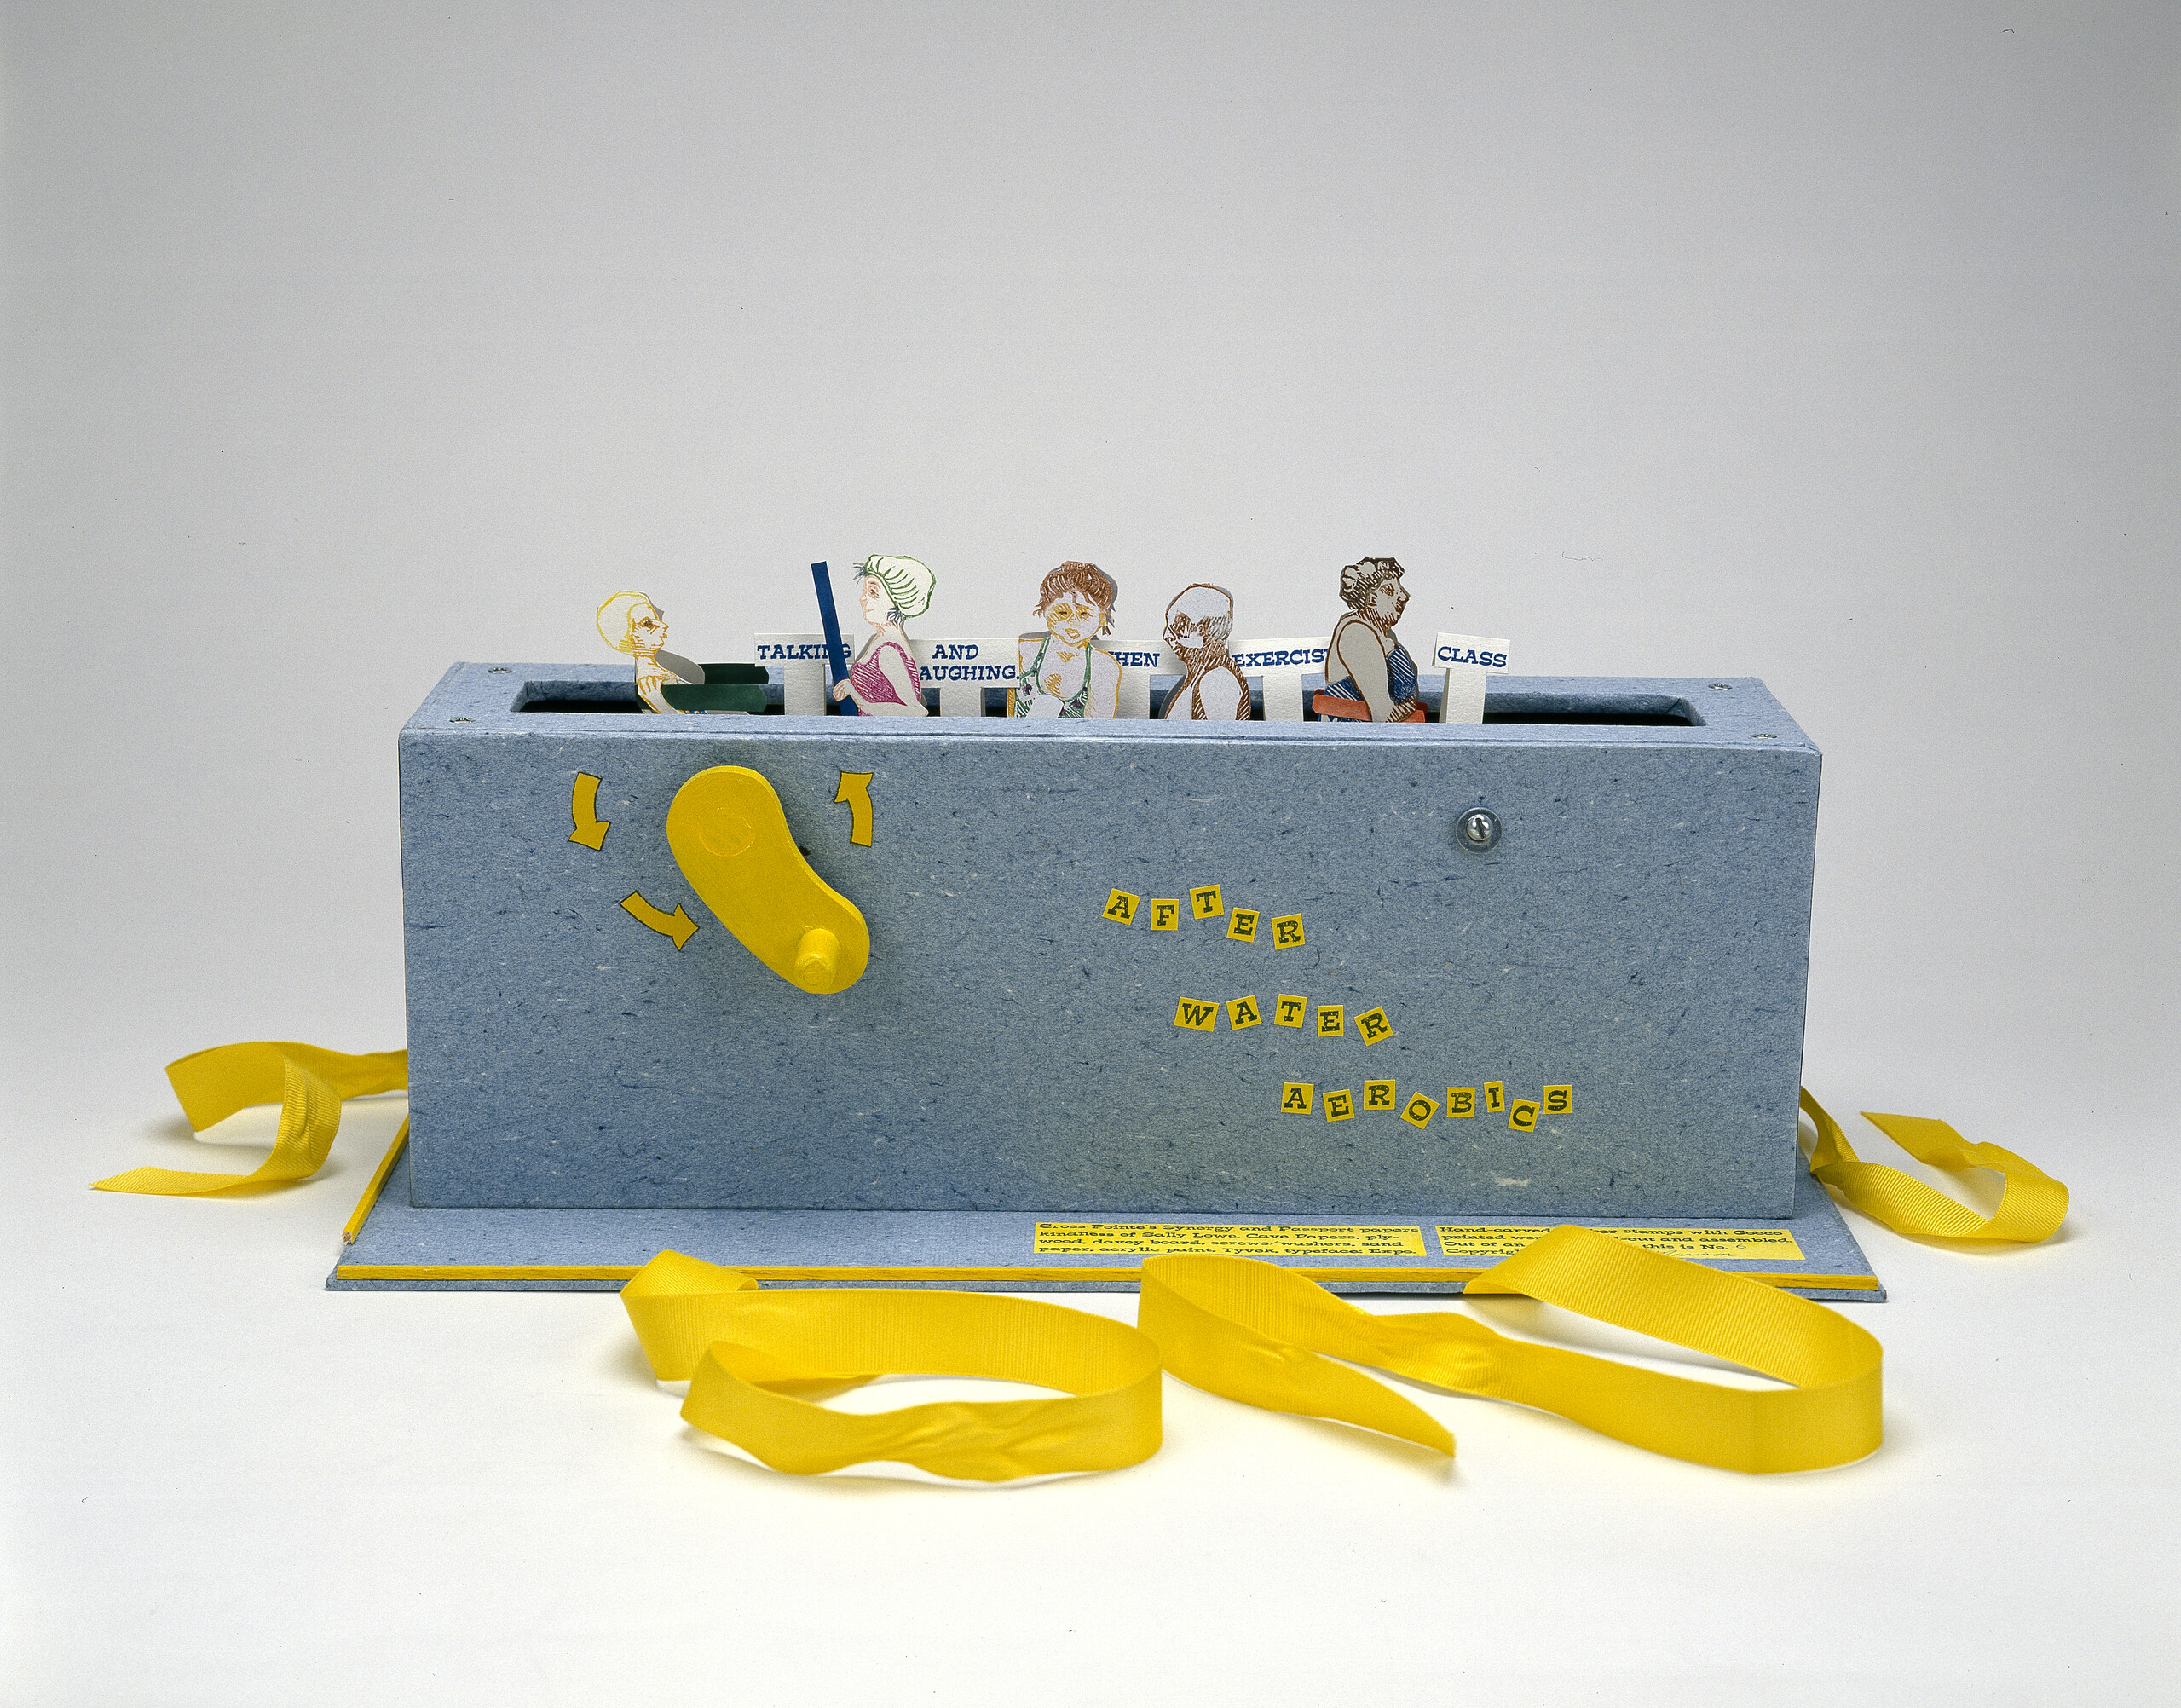 Paper figures in swimwear emerge from a grey-blue box with a slot in the top, like a toaster, and a yellow crank on the side. Small signs say “talking” “and laughing” “exercise” “class.” Yellow ribbons, untied, are at the base of the box.